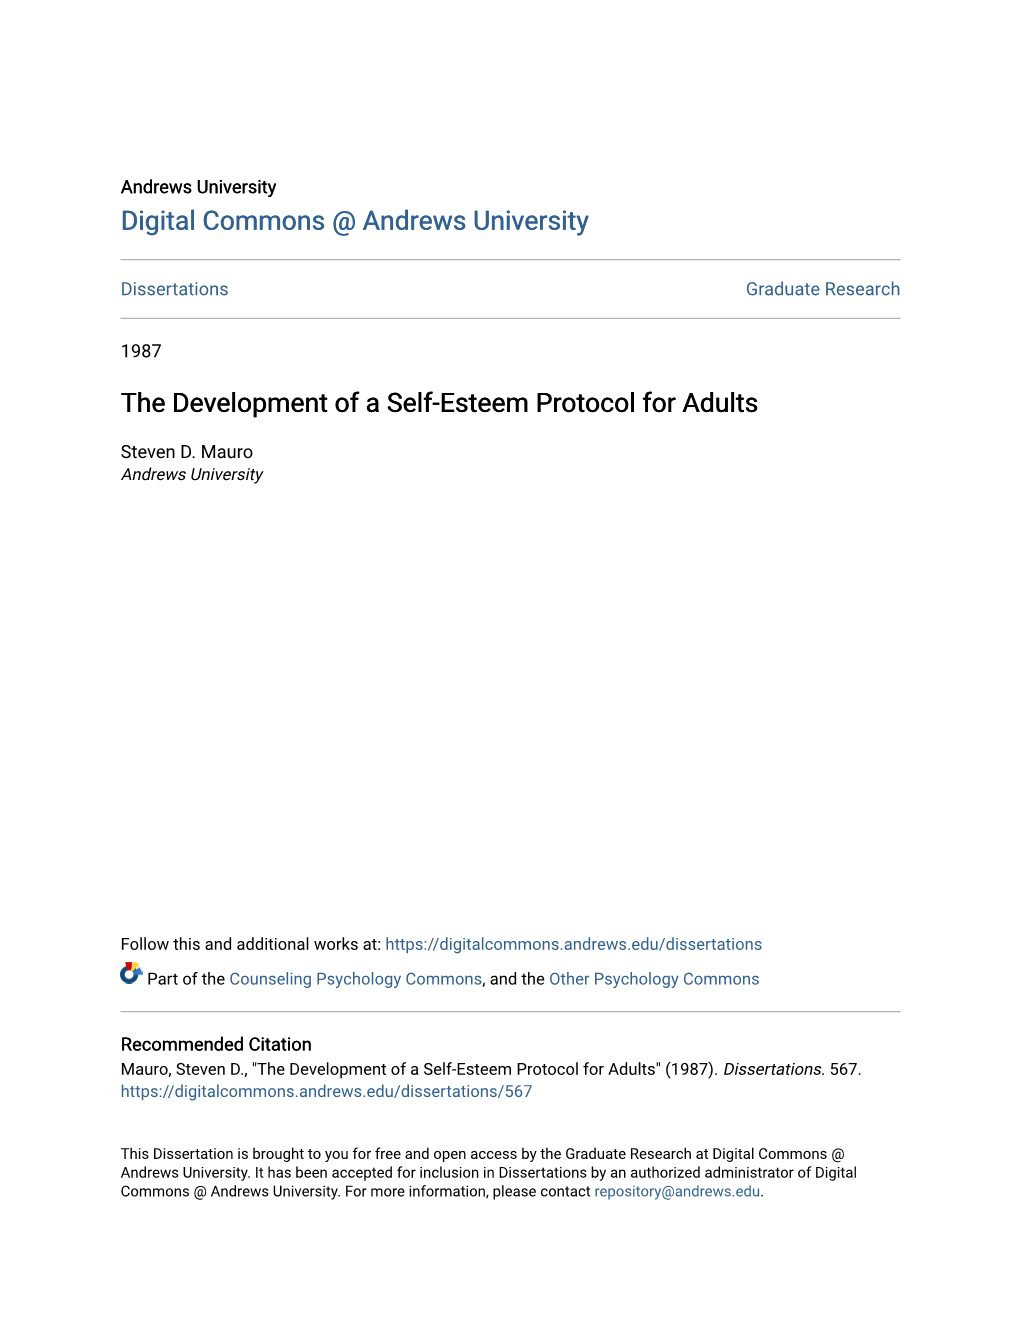 The Development of a Self-Esteem Protocol for Adults